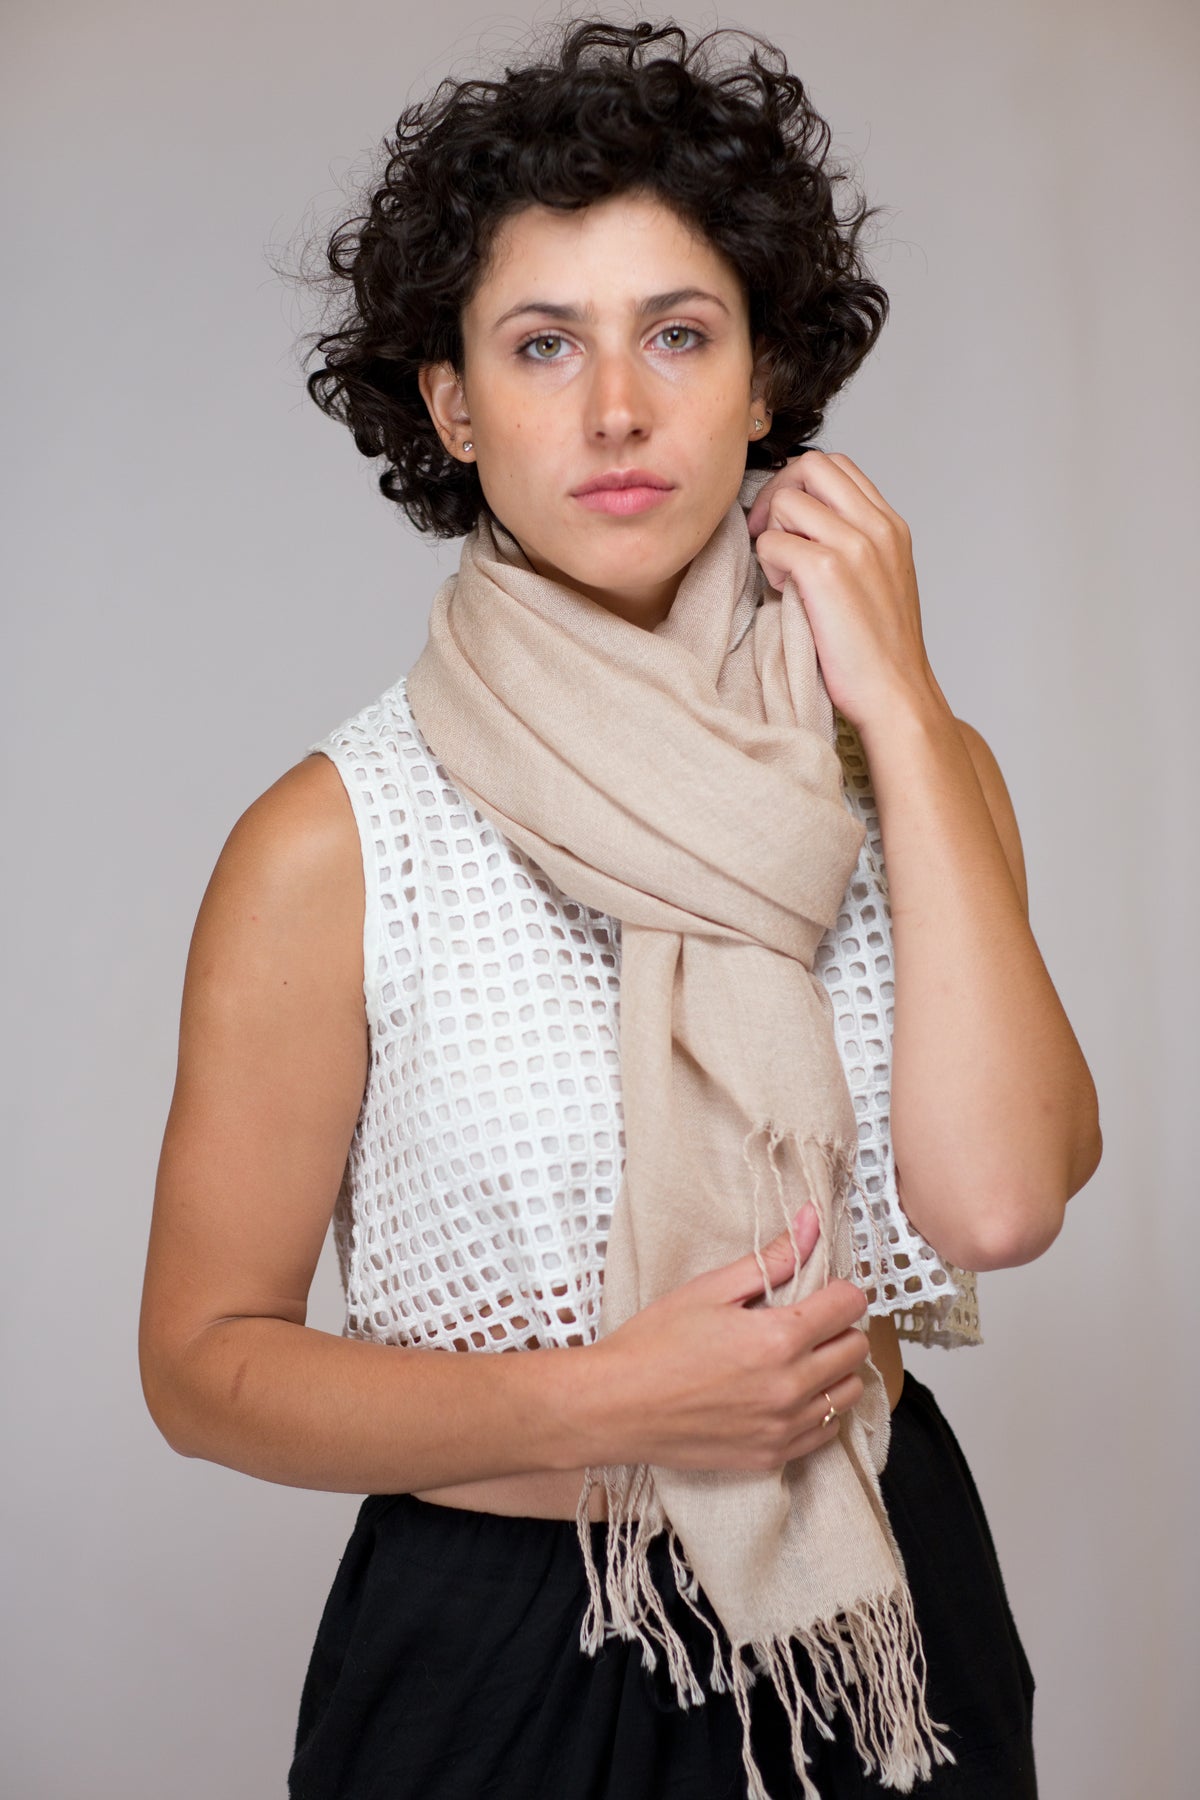 Whisper Weight Scarf - Solid